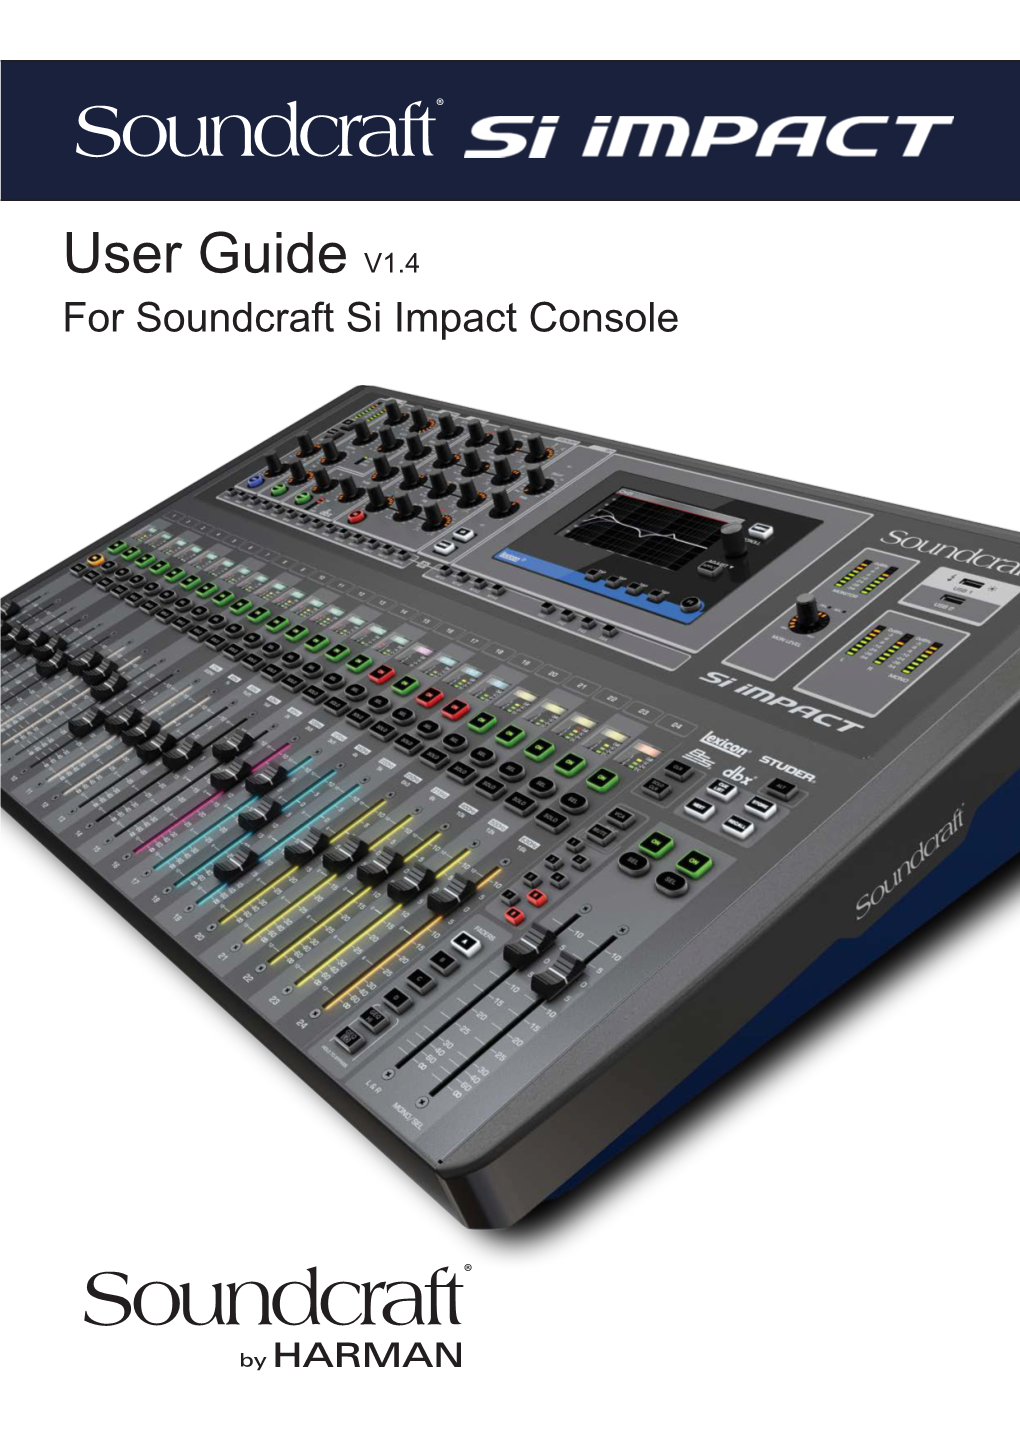 User Guide V1.4 for Soundcraft Si Impact Console